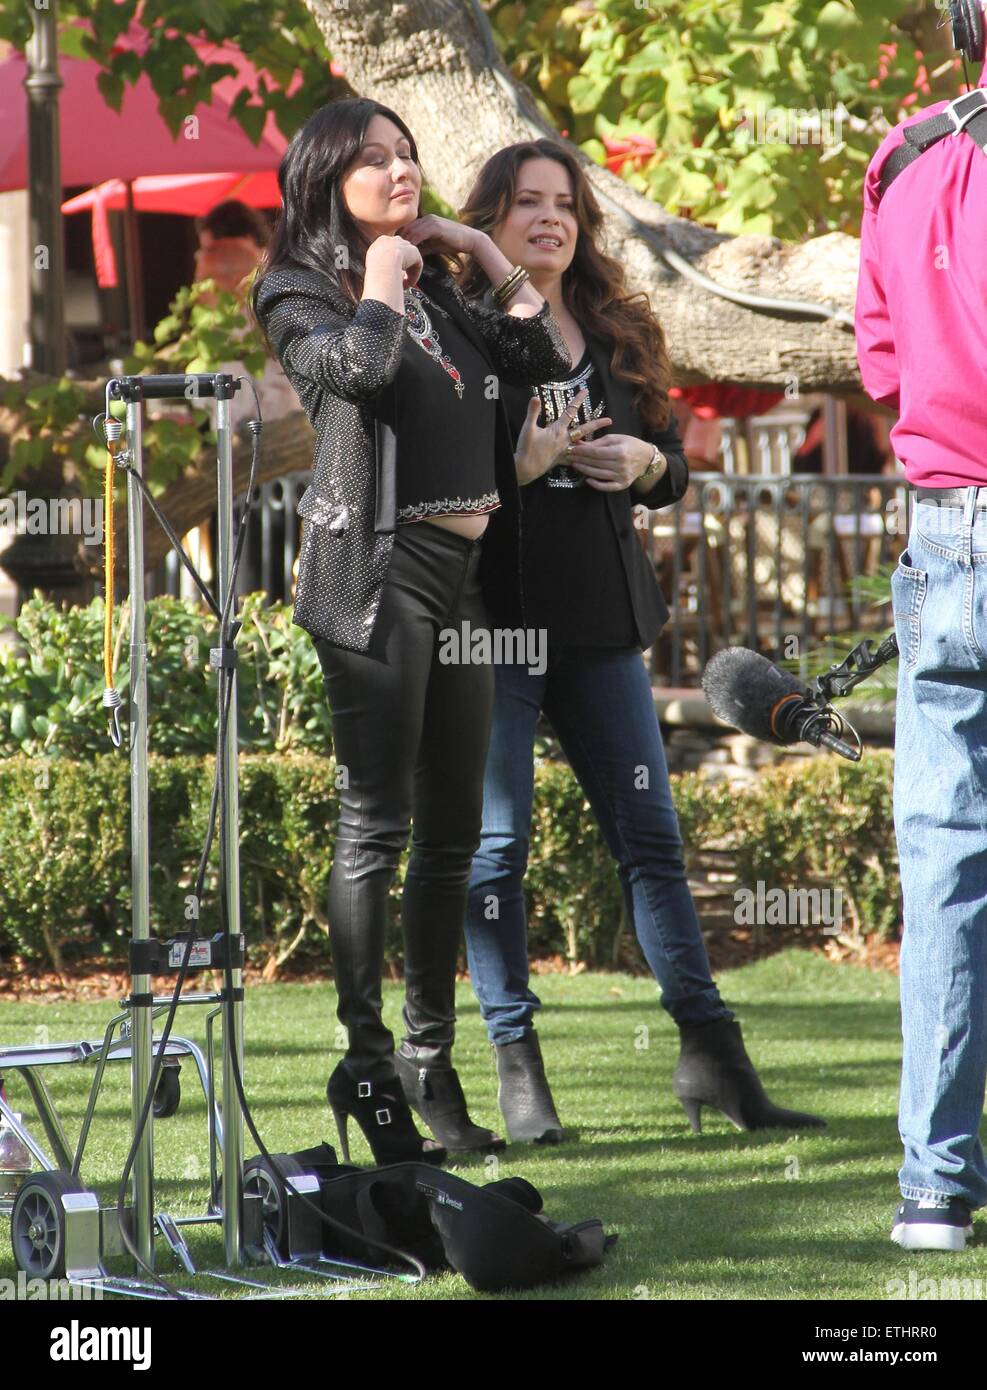 Shannen Doherty and Holly Marie Combs promote their reality show at The  Grove in Hollywood Featuring: Shannen Doherty, Holly Marie Combs Where: Los  Angeles, California, United States When: 07 Jan 2015 Credit: